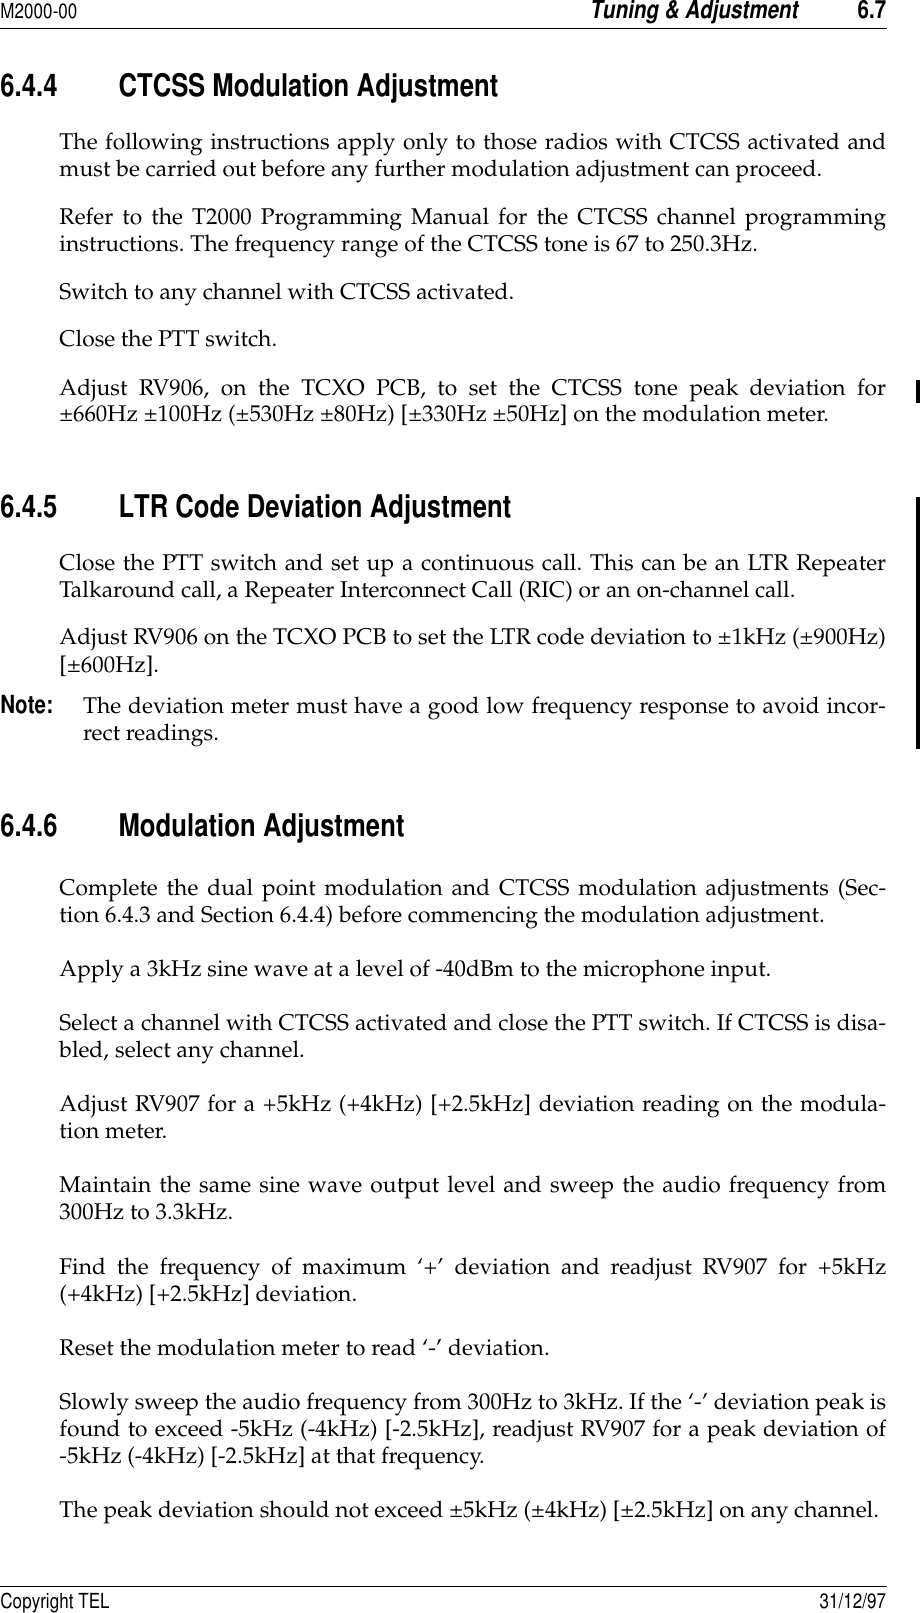 M2000-00Tuning &amp; Adjustment6.7Copyright TEL 31/12/976.4.4 CTCSS Modulation Adjustment The following instructions apply only to those radios with CTCSS activated andmust be carried out before any further modulation adjustment can proceed.Refer to the T2000 Programming Manual for the CTCSS channel programminginstructions. The frequency range of the CTCSS tone is 67 to 250.3Hz.Switch to any channel with CTCSS activated.Close the PTT switch.Adjust RV906, on the TCXO PCB, to set the CTCSS tone peak deviation for±660Hz ±100Hz (±530Hz ±80Hz) [±330Hz ±50Hz] on the modulation meter.6.4.5 LTR Code Deviation AdjustmentClose the PTT switch and set up a continuous call. This can be an LTR RepeaterTalkaround call, a Repeater Interconnect Call (RIC) or an on-channel call.Adjust RV906 on the TCXO PCB to set the LTR code deviation to ±1kHz (±900Hz)[±600Hz].Note:The deviation meter must have a good low frequency response to avoid incor-rect readings.6.4.6 Modulation Adjustment Complete the dual point modulation and CTCSS modulation adjustments (Sec-tion 6.4.3 and Section 6.4.4) before commencing the modulation adjustment.Apply a 3kHz sine wave at a level of -40dBm to the microphone input.Select a channel with CTCSS activated and close the PTT switch. If CTCSS is disa-bled, select any channel.Adjust RV907 for a +5kHz (+4kHz) [+2.5kHz] deviation reading on the modula-tion meter.Maintain the same sine wave output level and sweep the audio frequency from300Hz to 3.3kHz.Find the frequency of maximum ‘+’ deviation and readjust RV907 for +5kHz(+4kHz) [+2.5kHz] deviation.Reset the modulation meter to read ‘-’ deviation.Slowly sweep the audio frequency from 300Hz to 3kHz. If the ‘-’ deviation peak isfound to exceed -5kHz (-4kHz) [-2.5kHz], readjust RV907 for a peak deviation of-5kHz (-4kHz) [-2.5kHz] at that frequency.The peak deviation should not exceed ±5kHz (±4kHz) [±2.5kHz] on any channel.